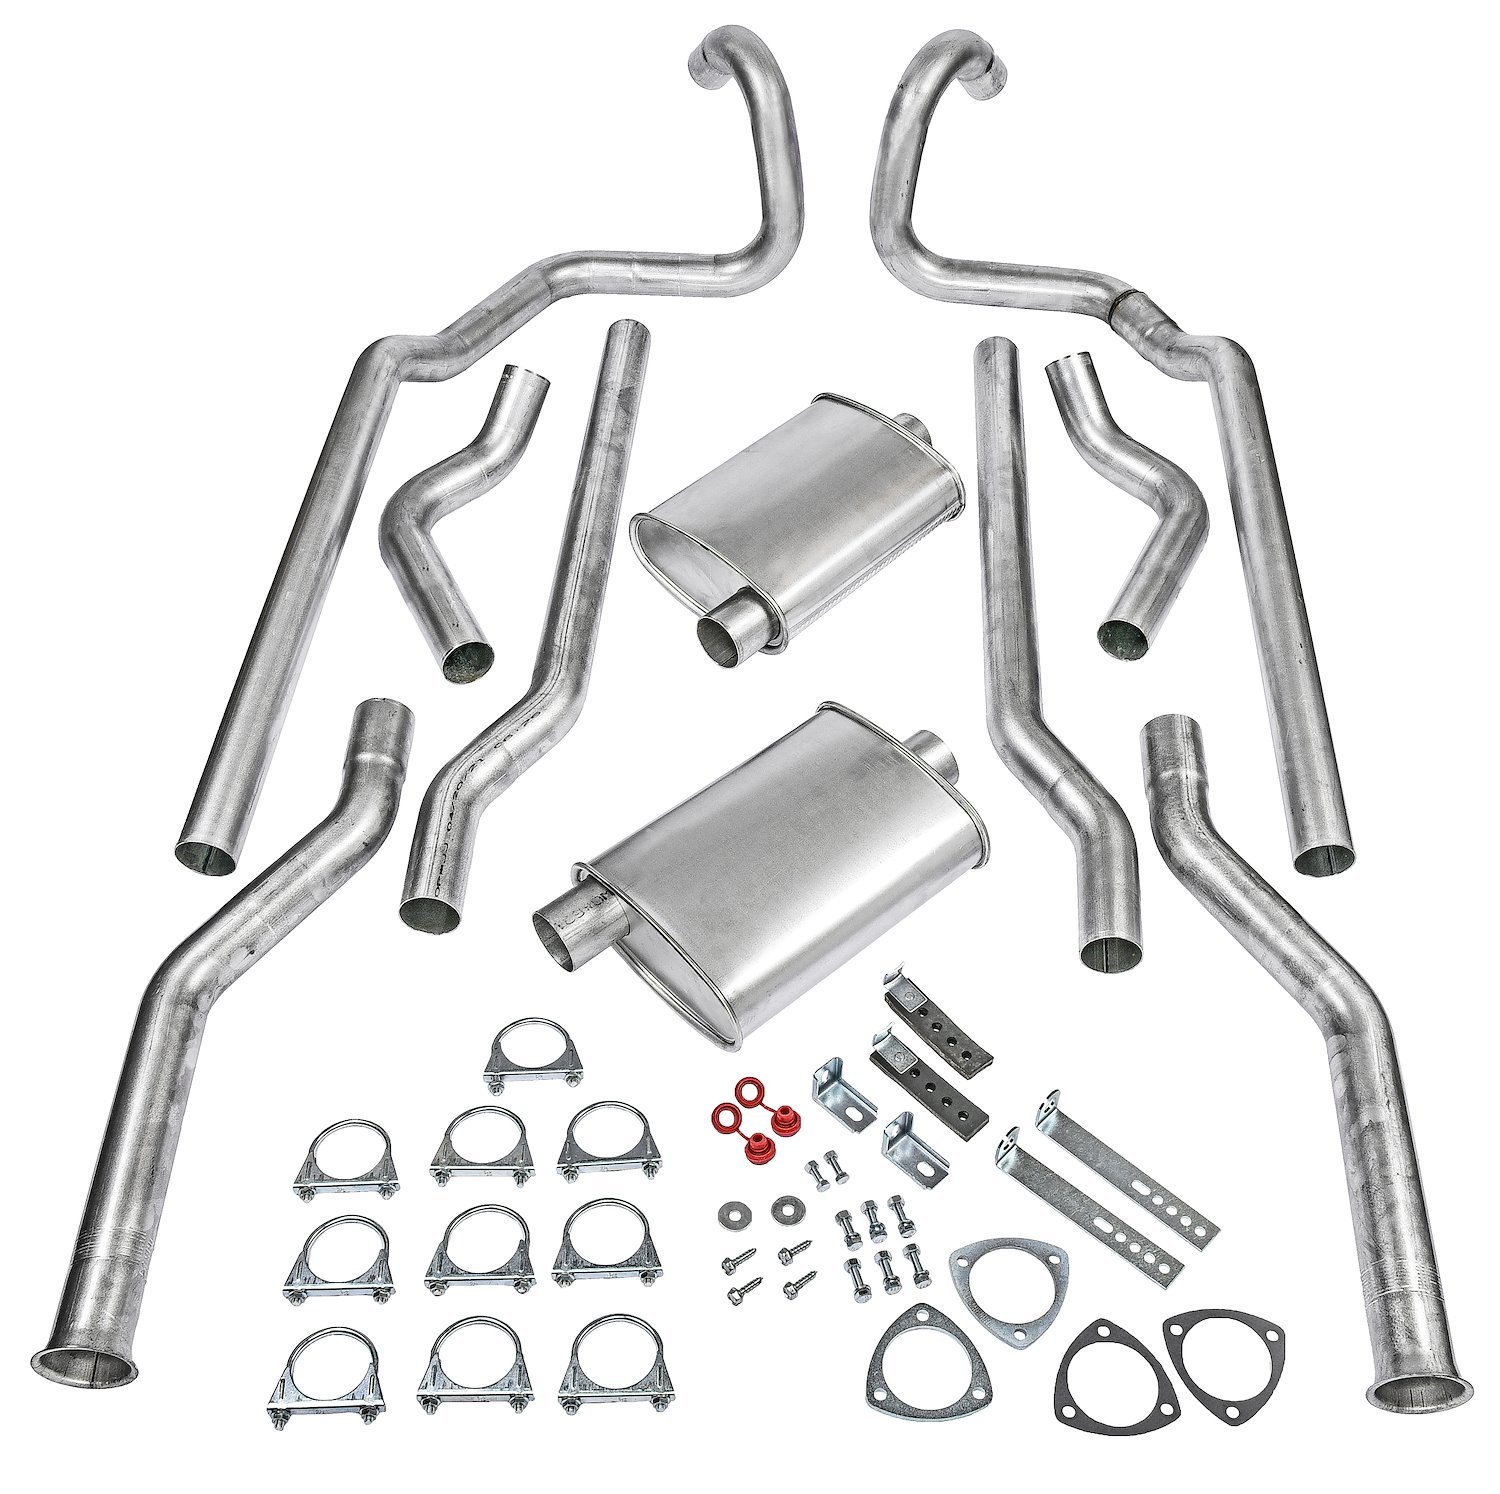 Header-Back Dual 2-1/2 in. Exhaust Kit 1973-1977 Chevelle,